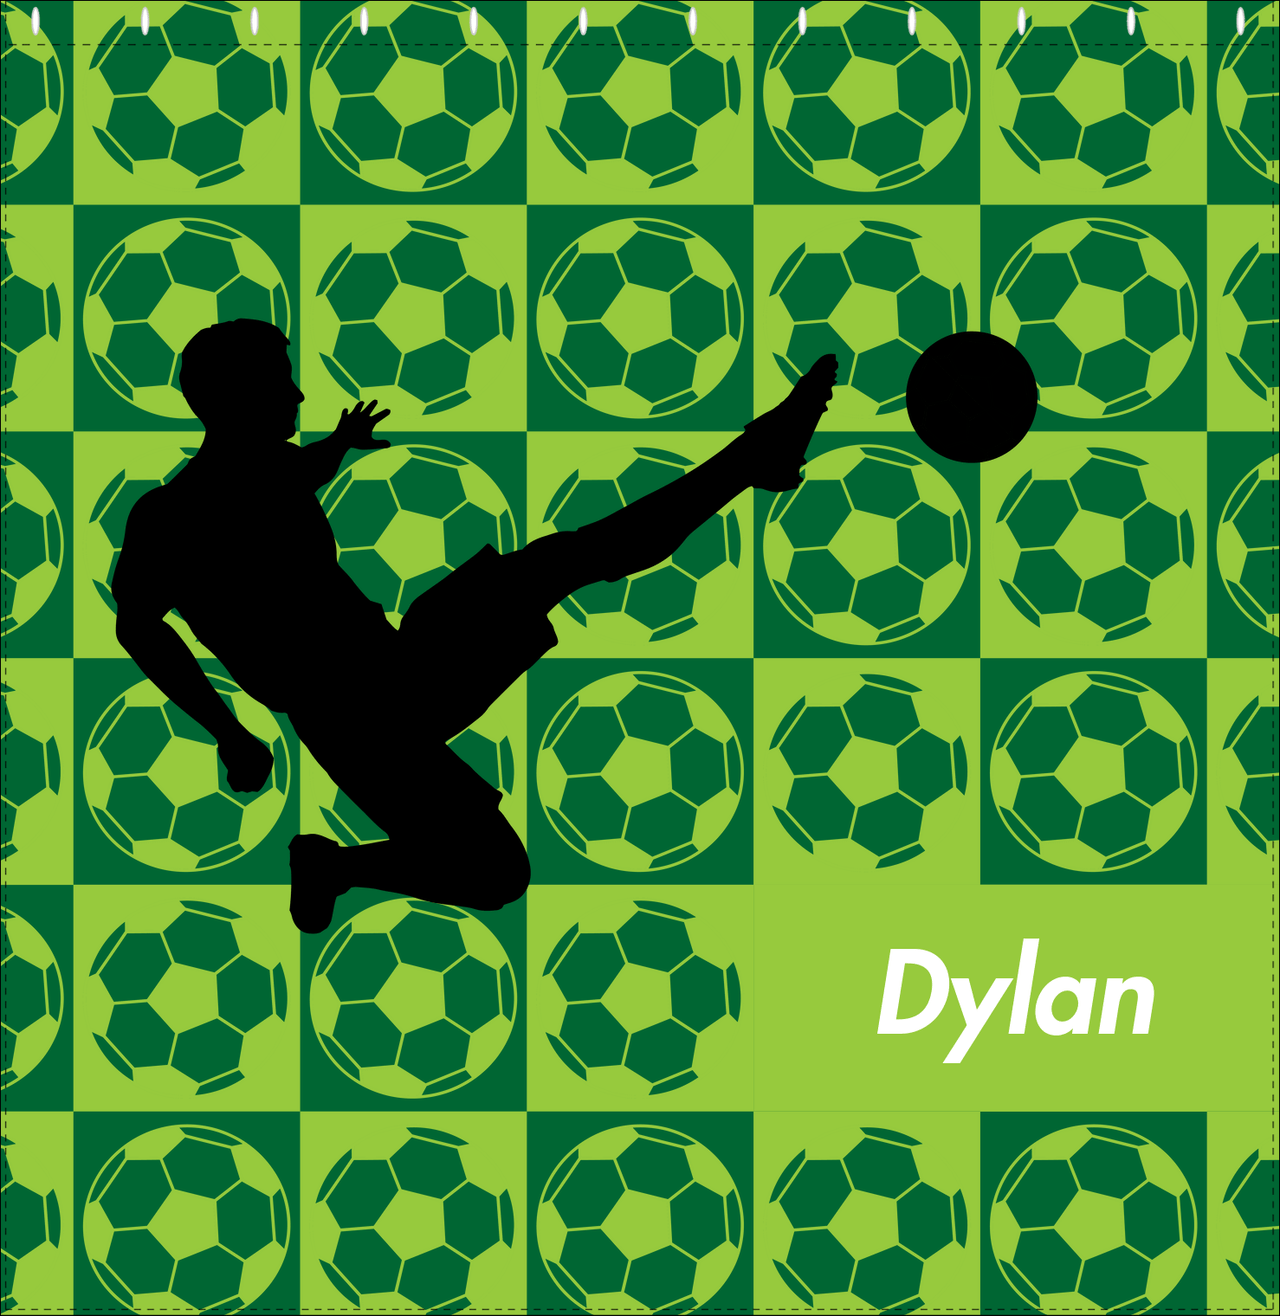 Personalized Soccer Shower Curtain XLVI - Green Background - Boy Silhouette III - Decorate View